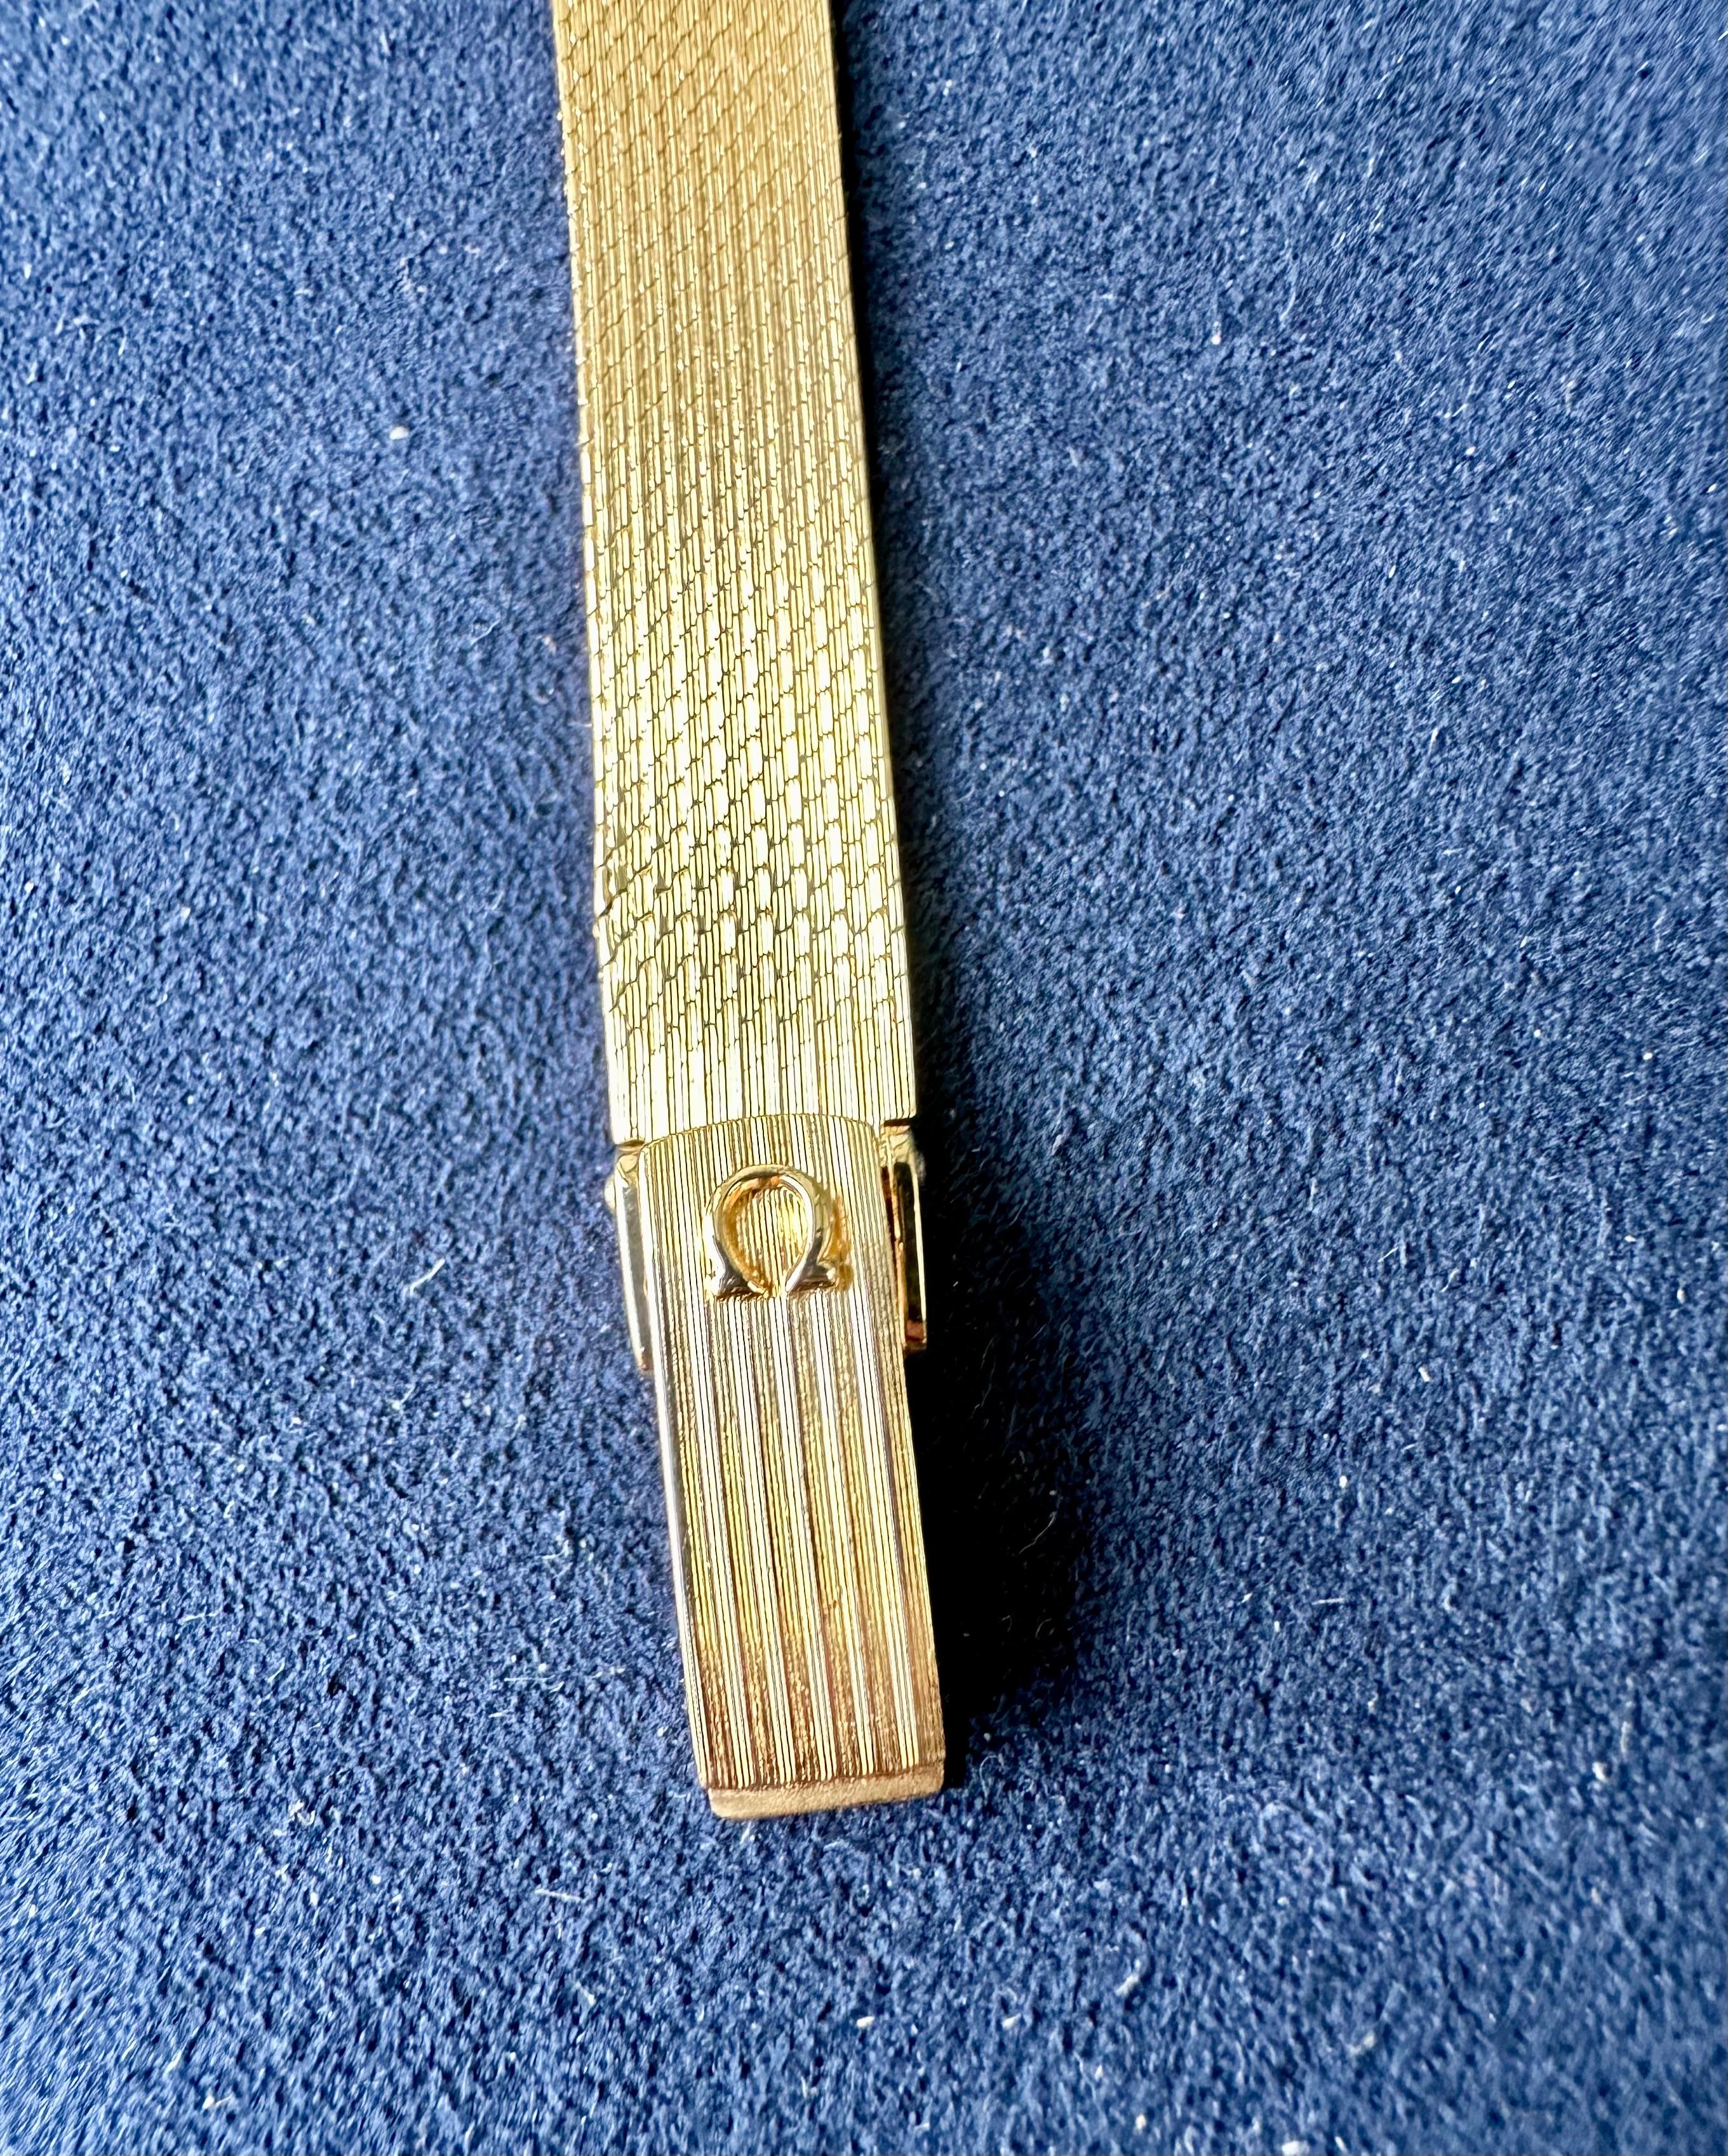  Omega 9k Yellow Gold Watch Manual Wind Vintage Watch For Sale 1